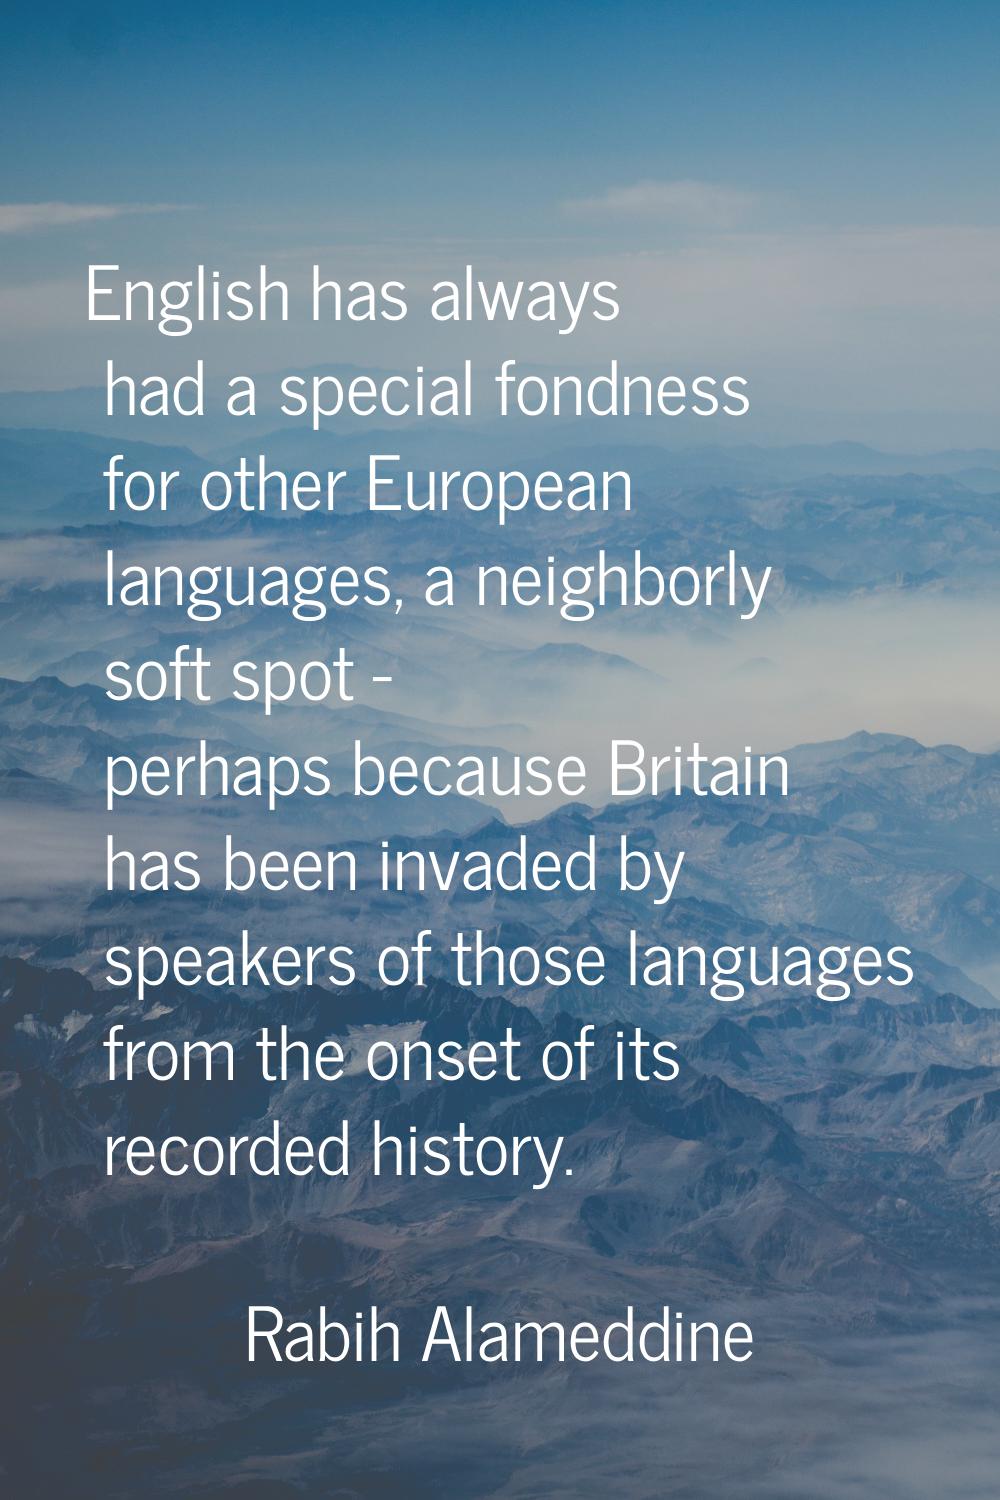 English has always had a special fondness for other European languages, a neighborly soft spot - pe